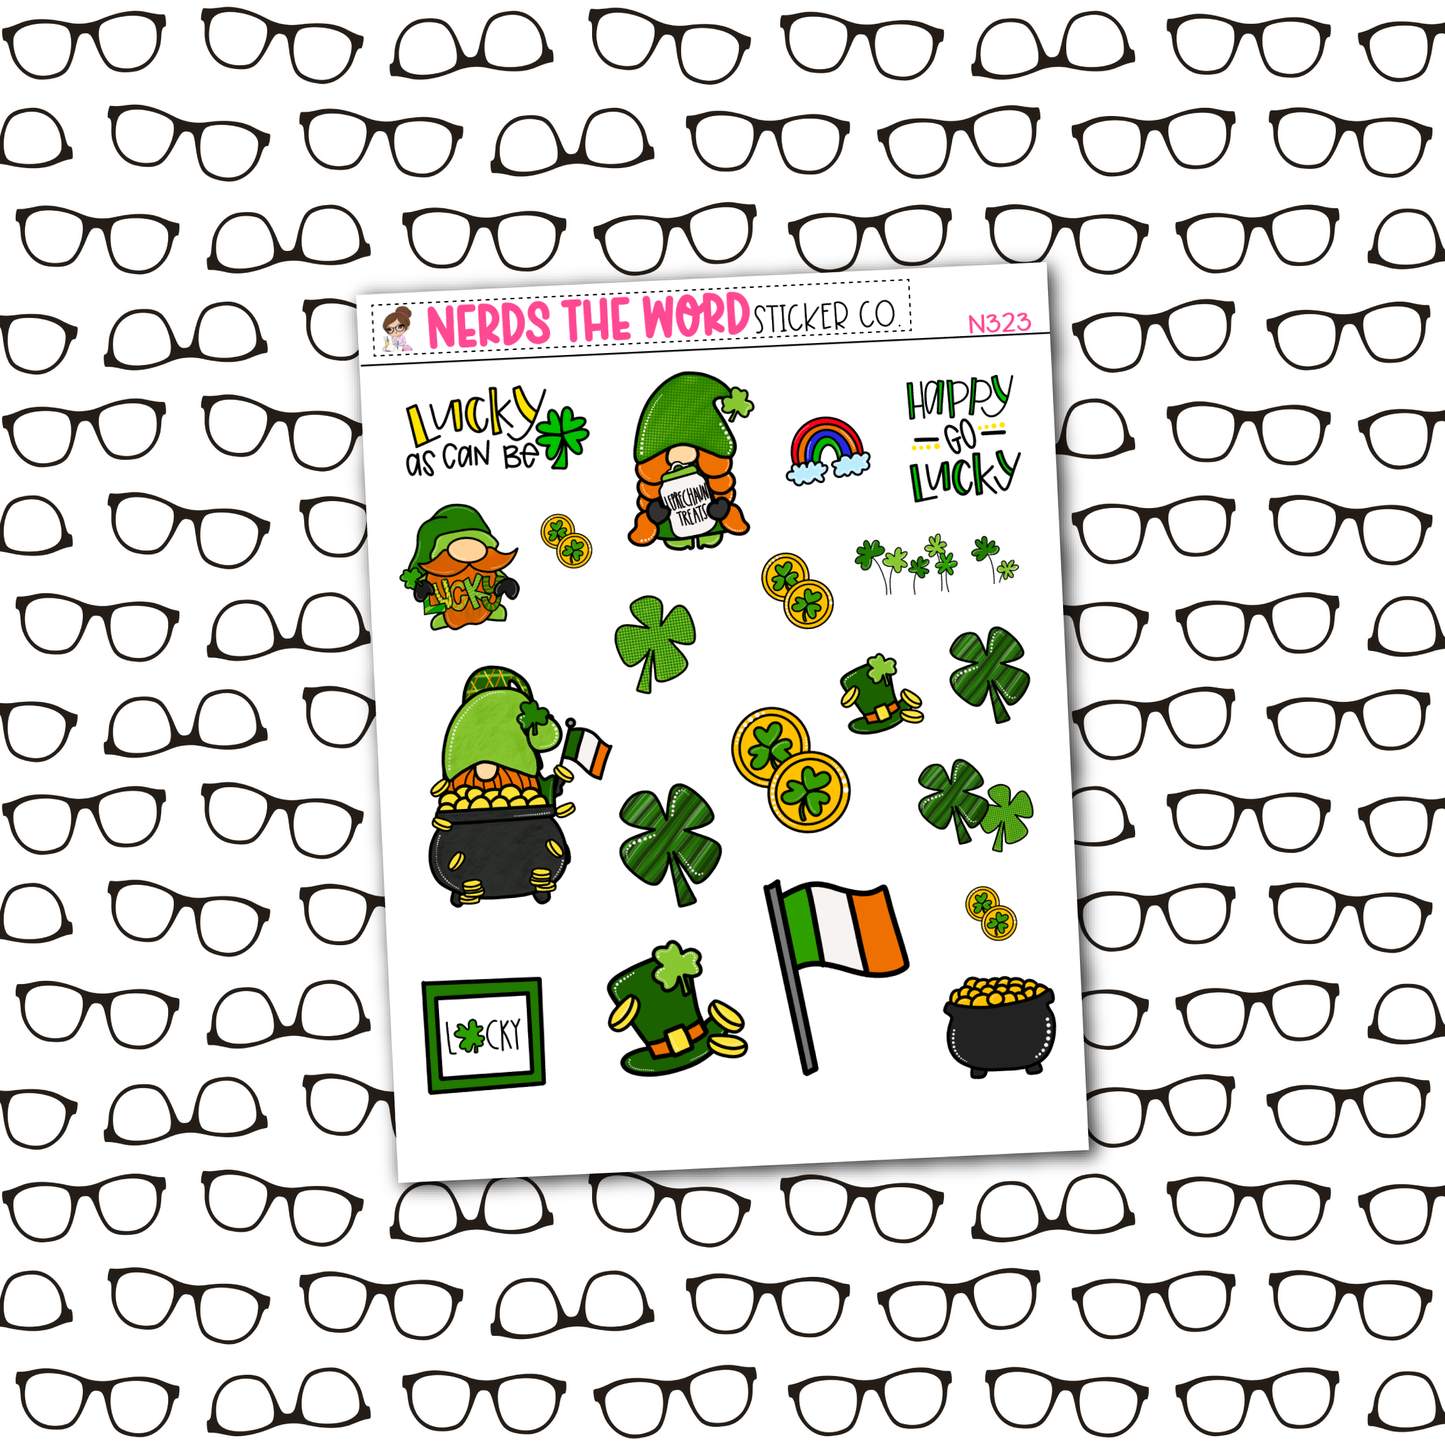 So Lucky Weekly Planner Sticker Kit